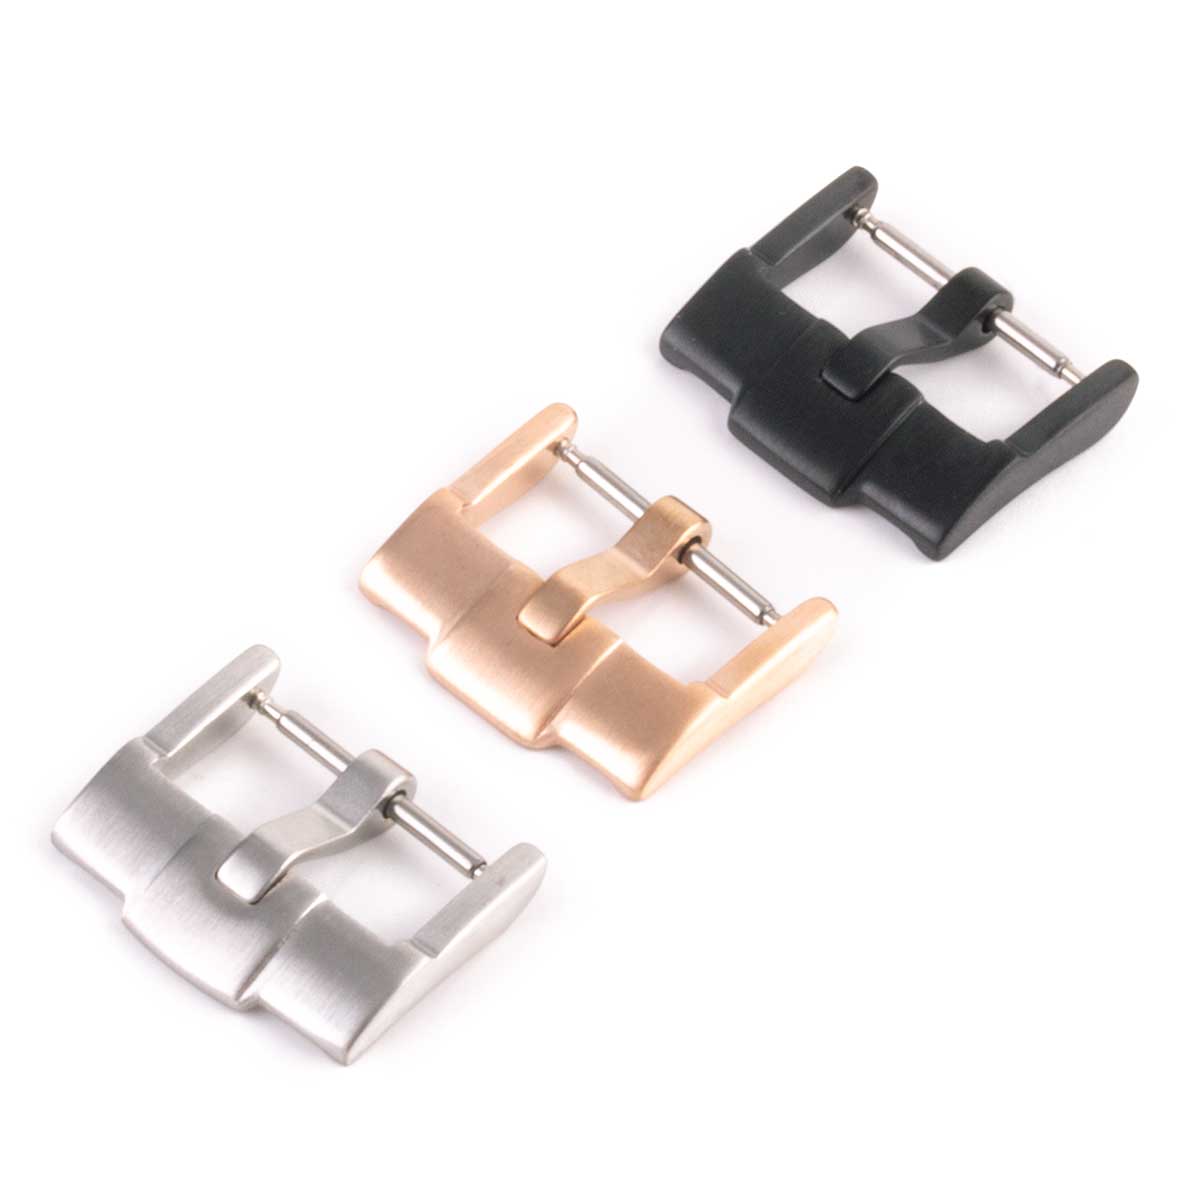 ABP tang buckle compatible with Audemars Piguet watches - 18mm, 20mm, 24mm